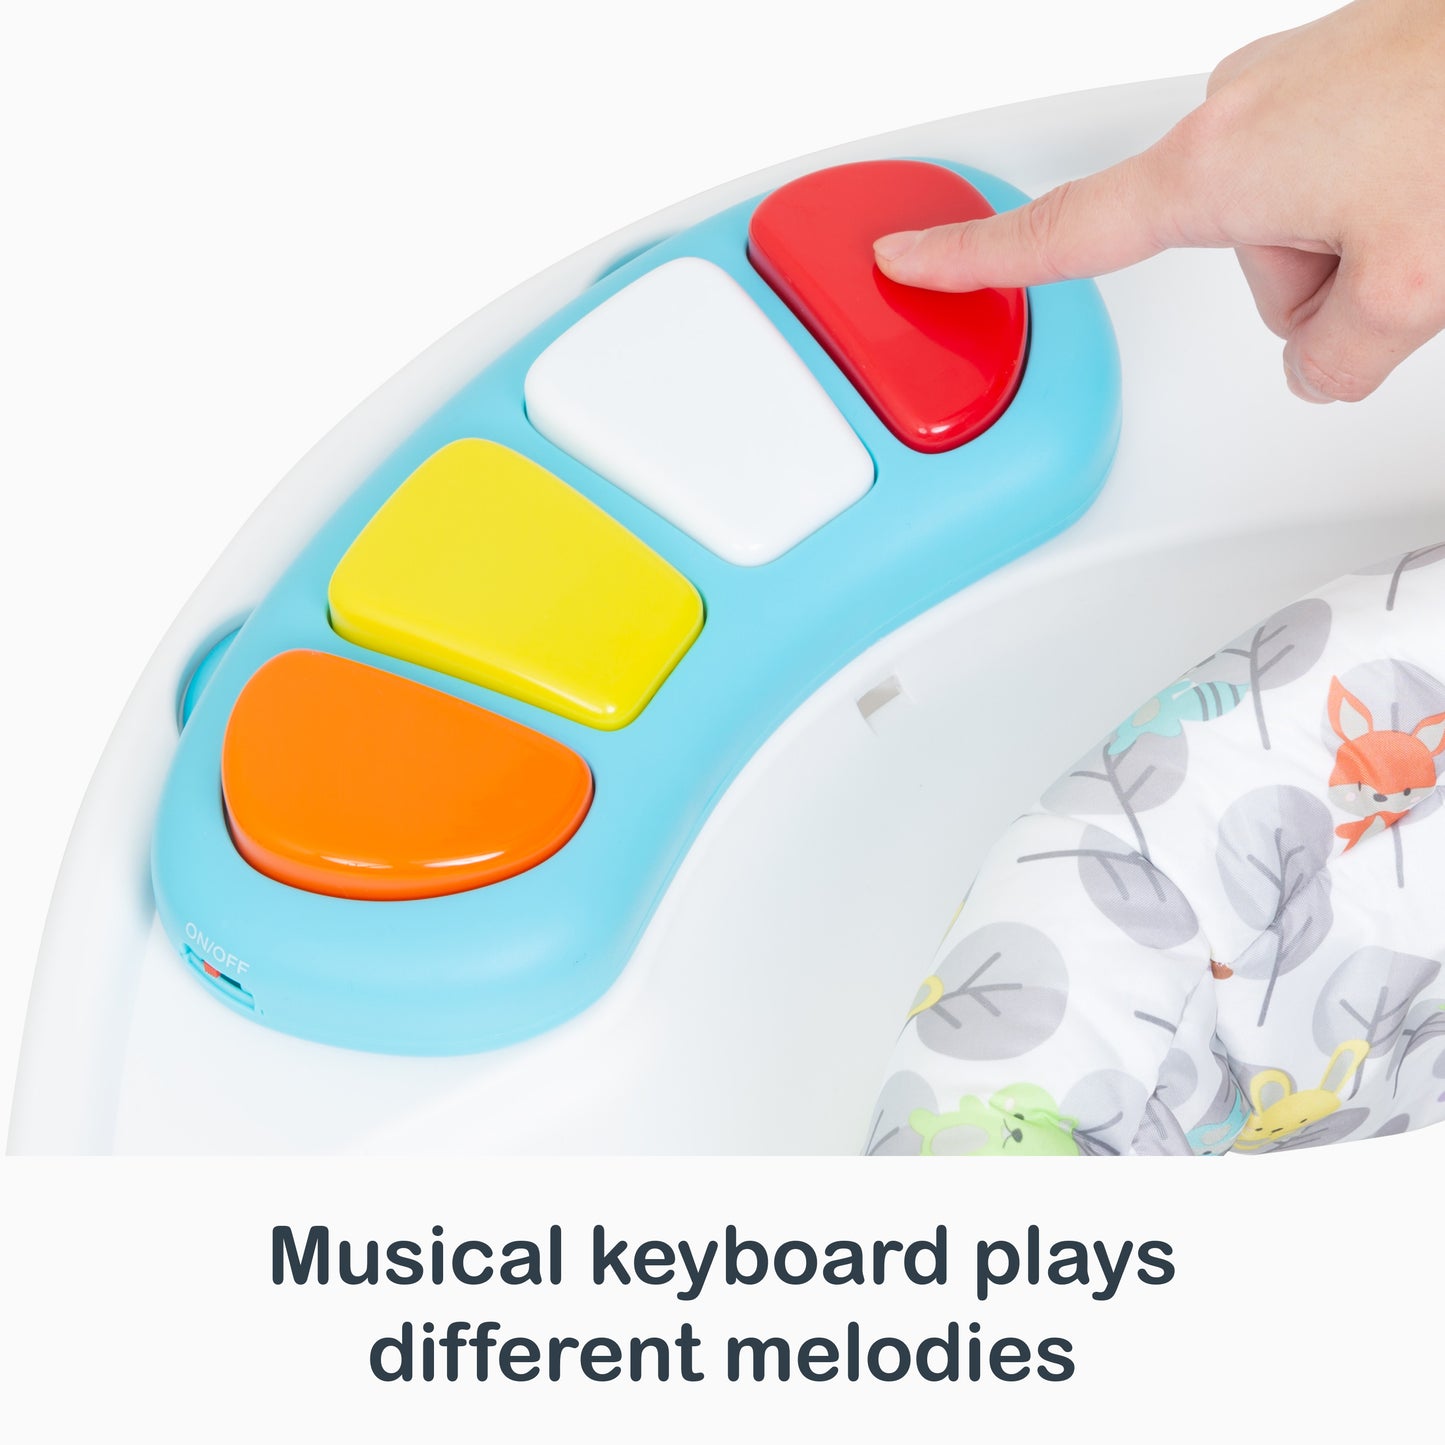 Musical keyboard plays different melodies on the Smart Steps by Baby Trend Bounce N’ Play 3-in-1 Activity Center